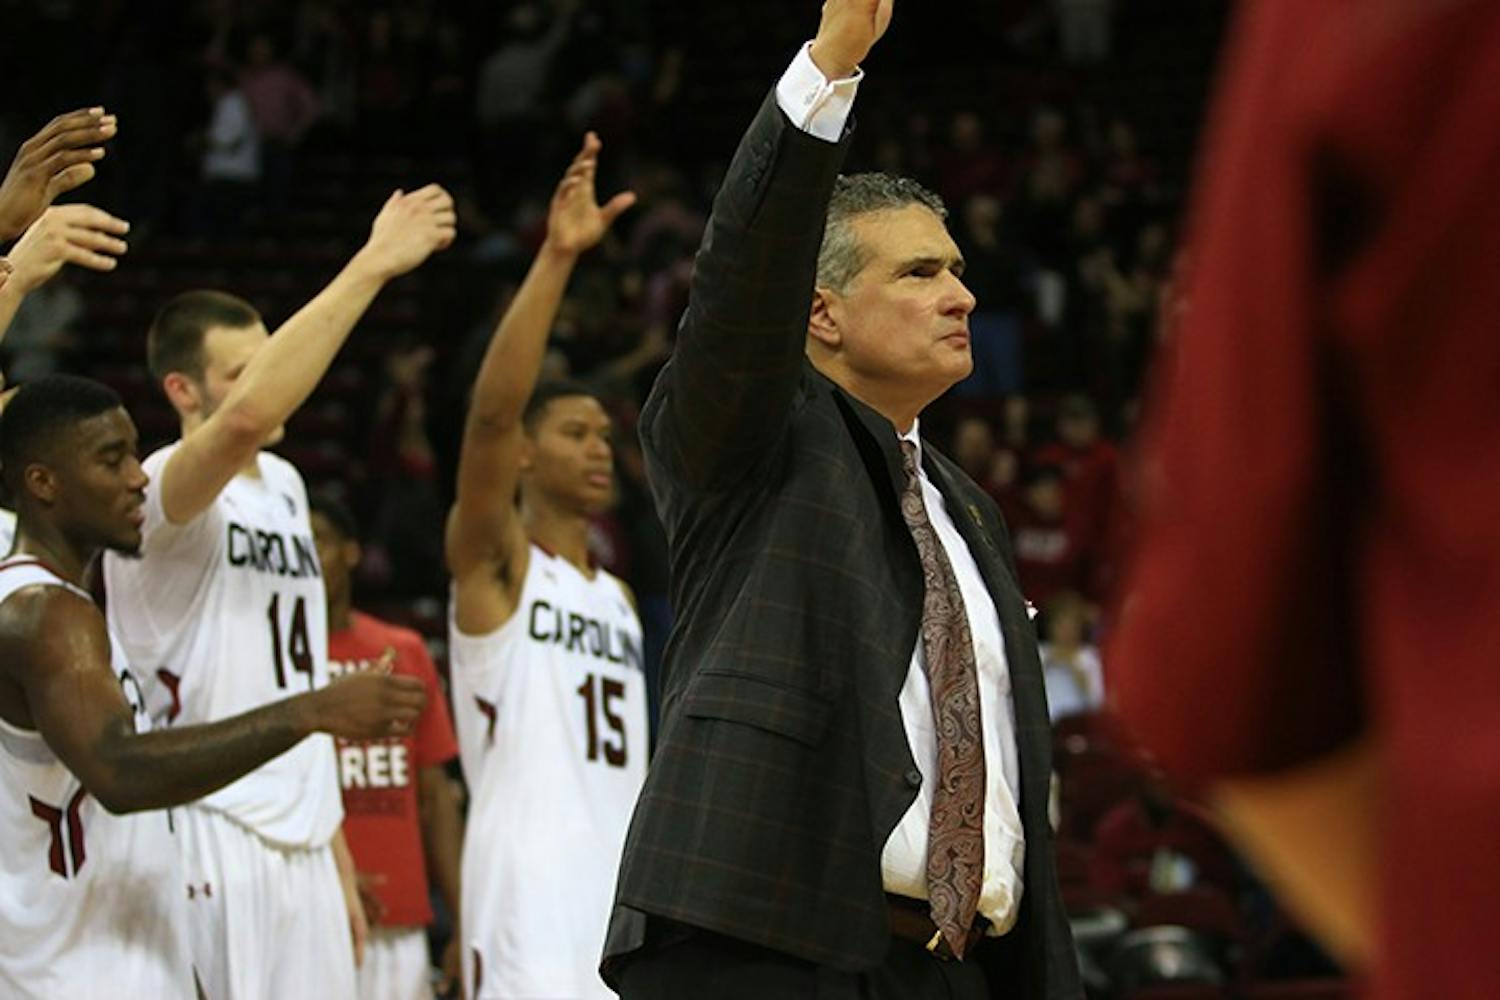 Coach&nbsp;Frank Martin recently elaborated on his opposition to late start times.&nbsp;